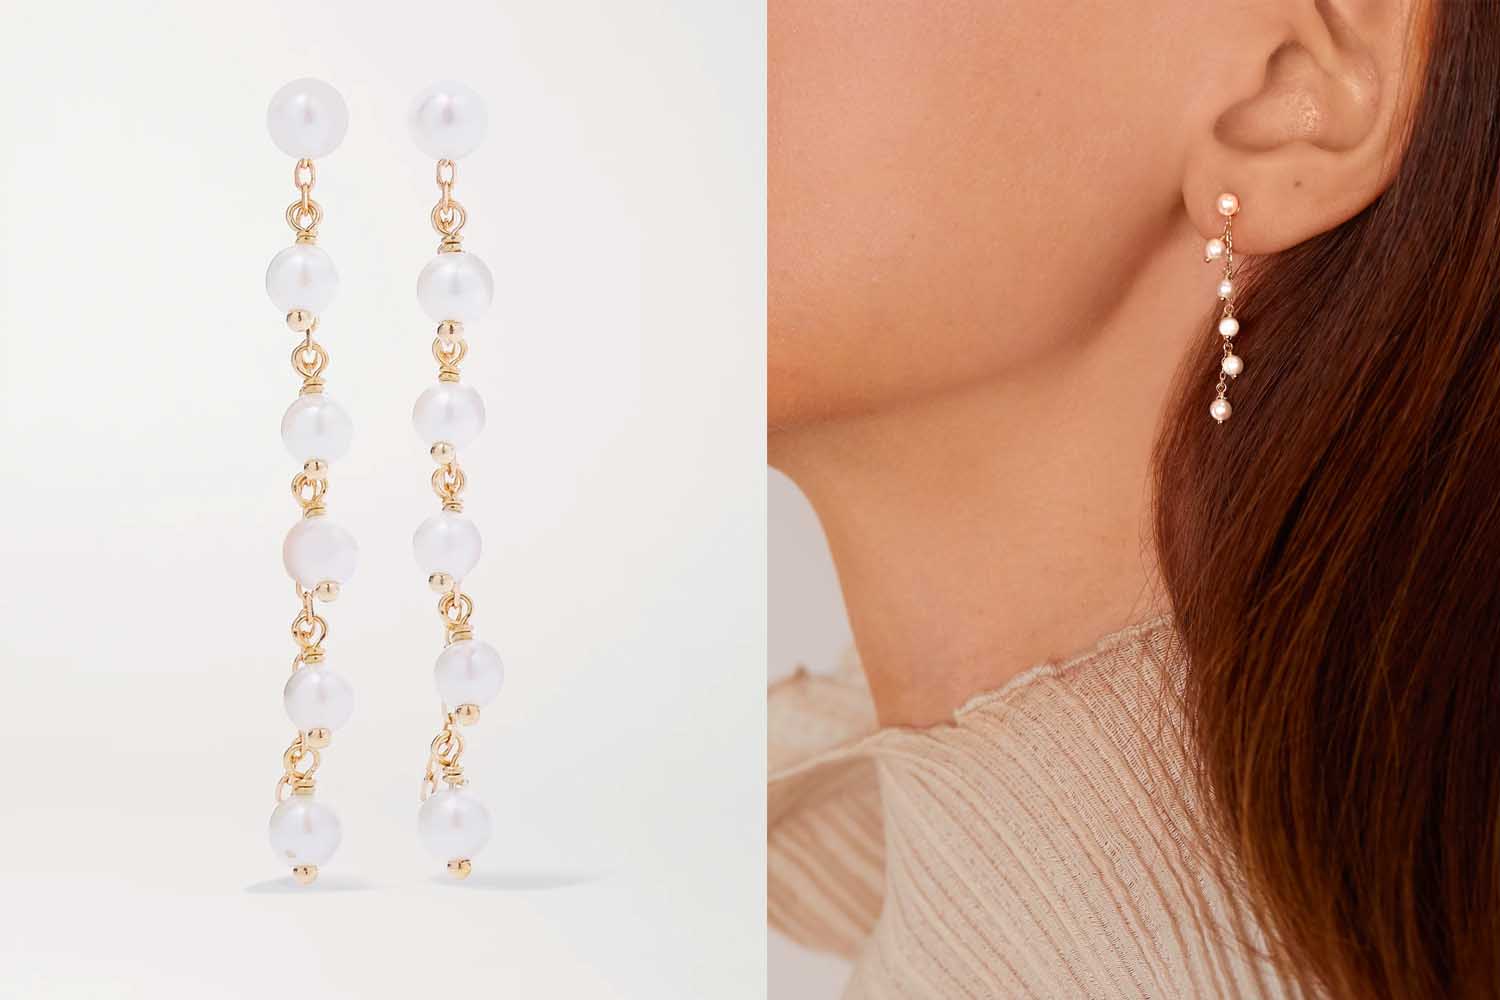 A pair of earrings strung with gold chain links and pearls, a perfect valentine's day gift, on a pink background. 